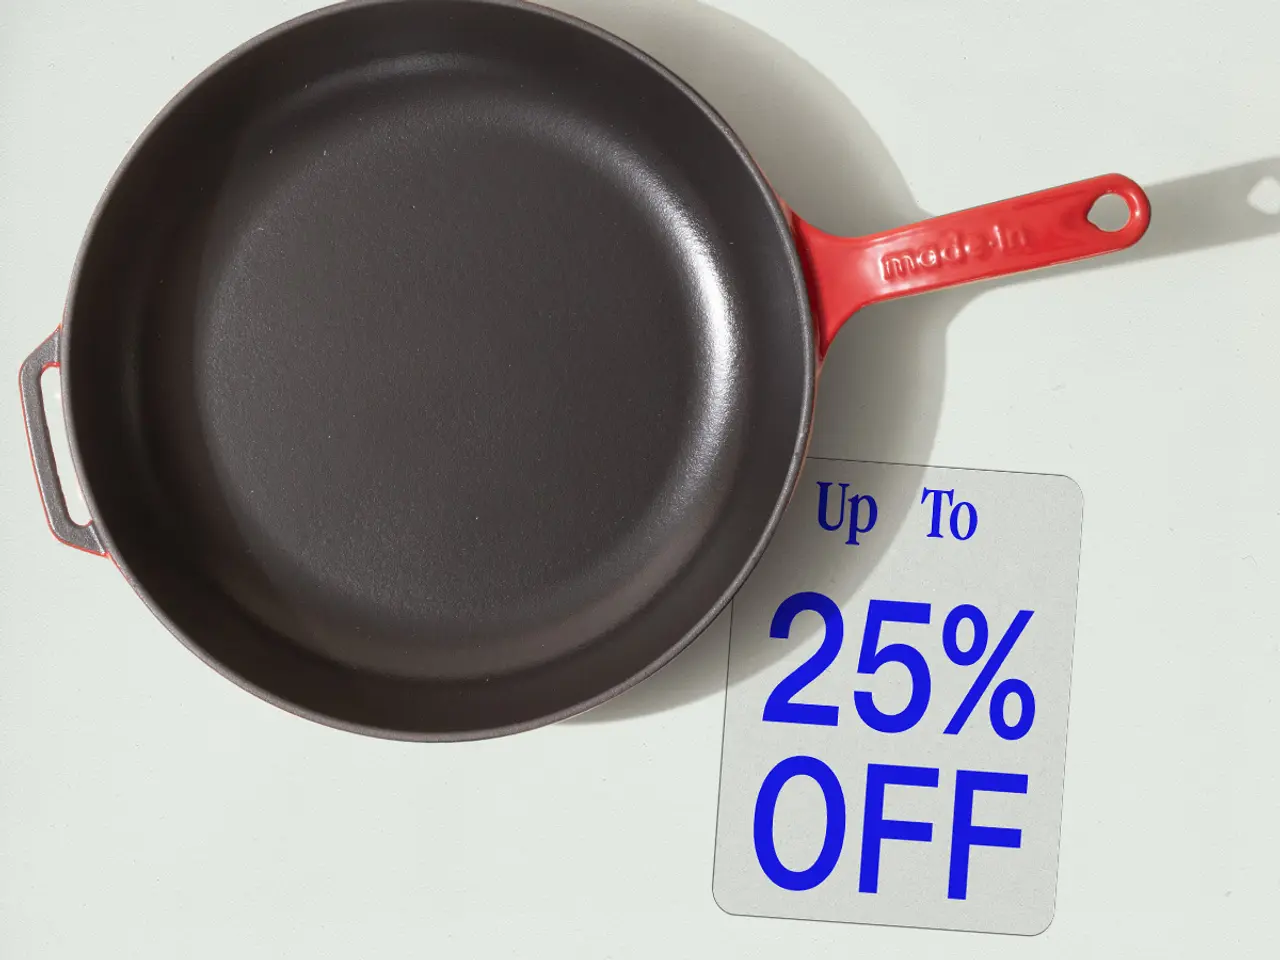 A red-handled frying pan is displayed next to a tag indicating a discount of up to 25% off.